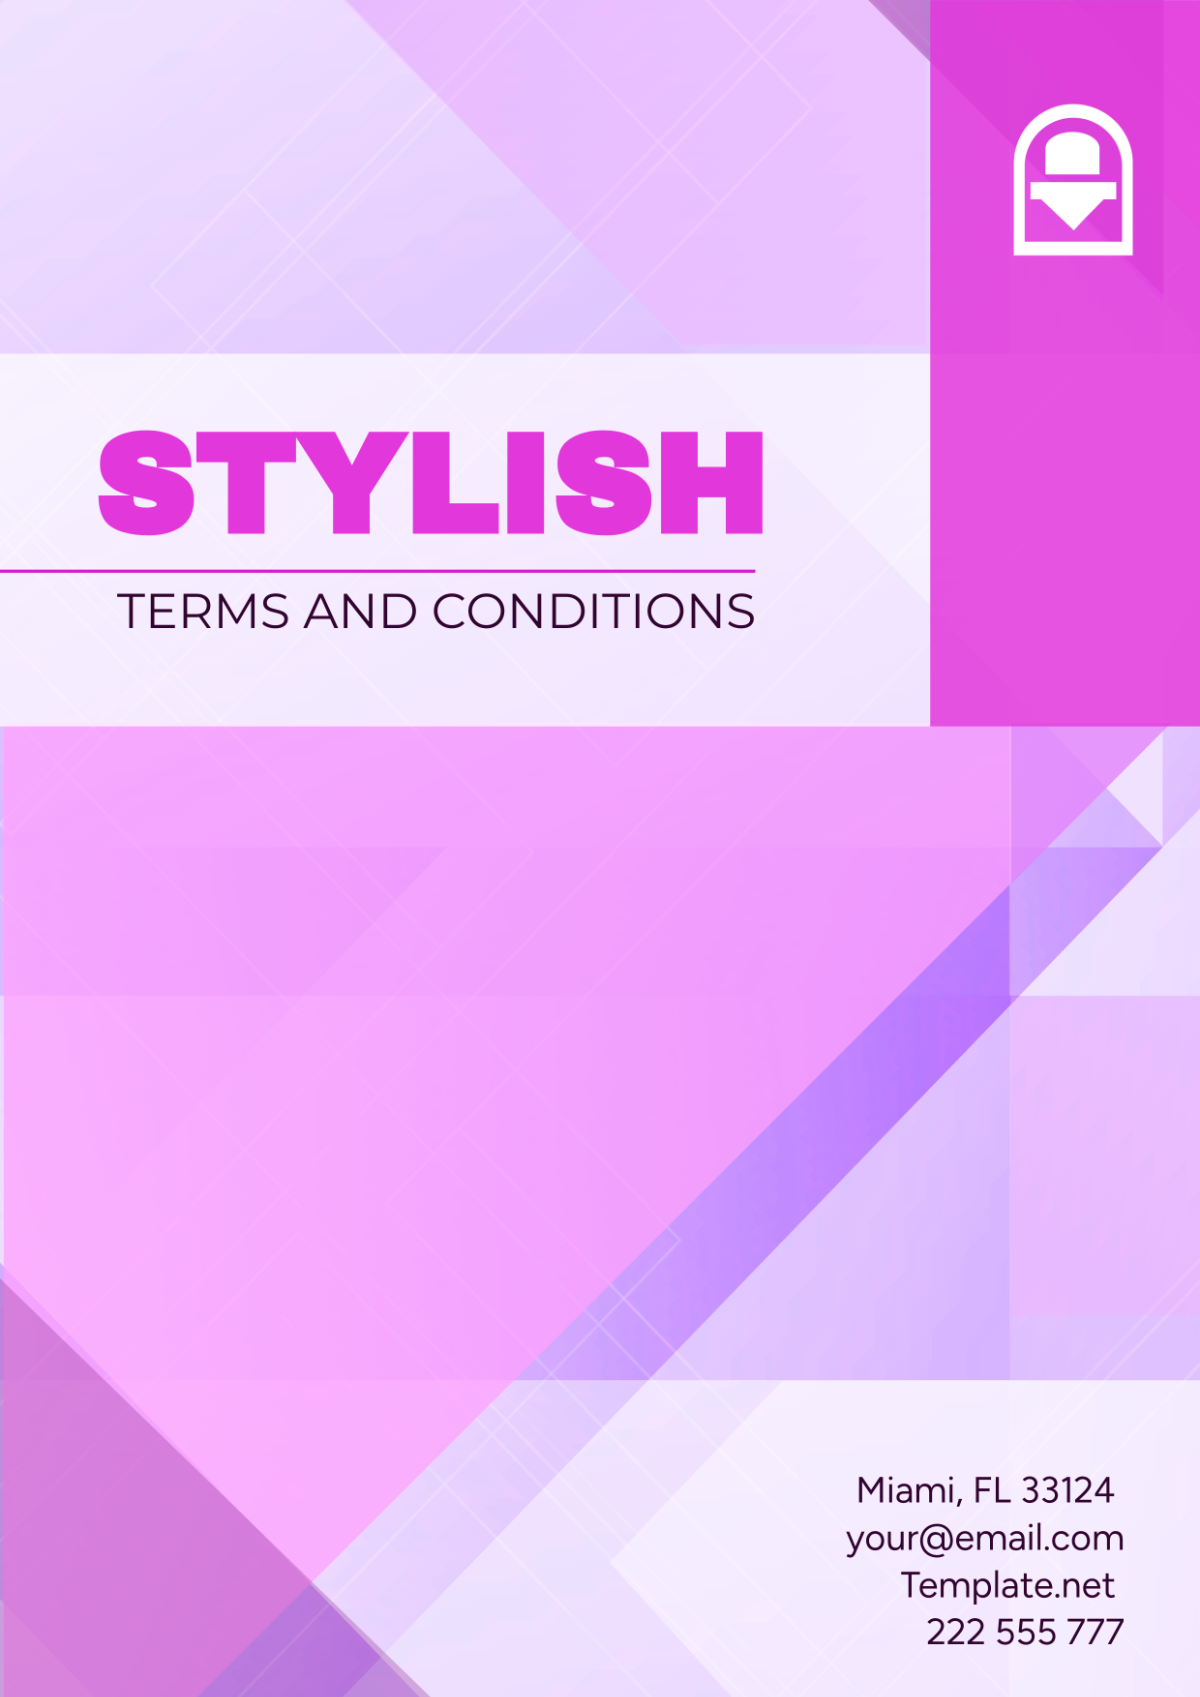 Stylish Terms and Conditions Cover Page Template